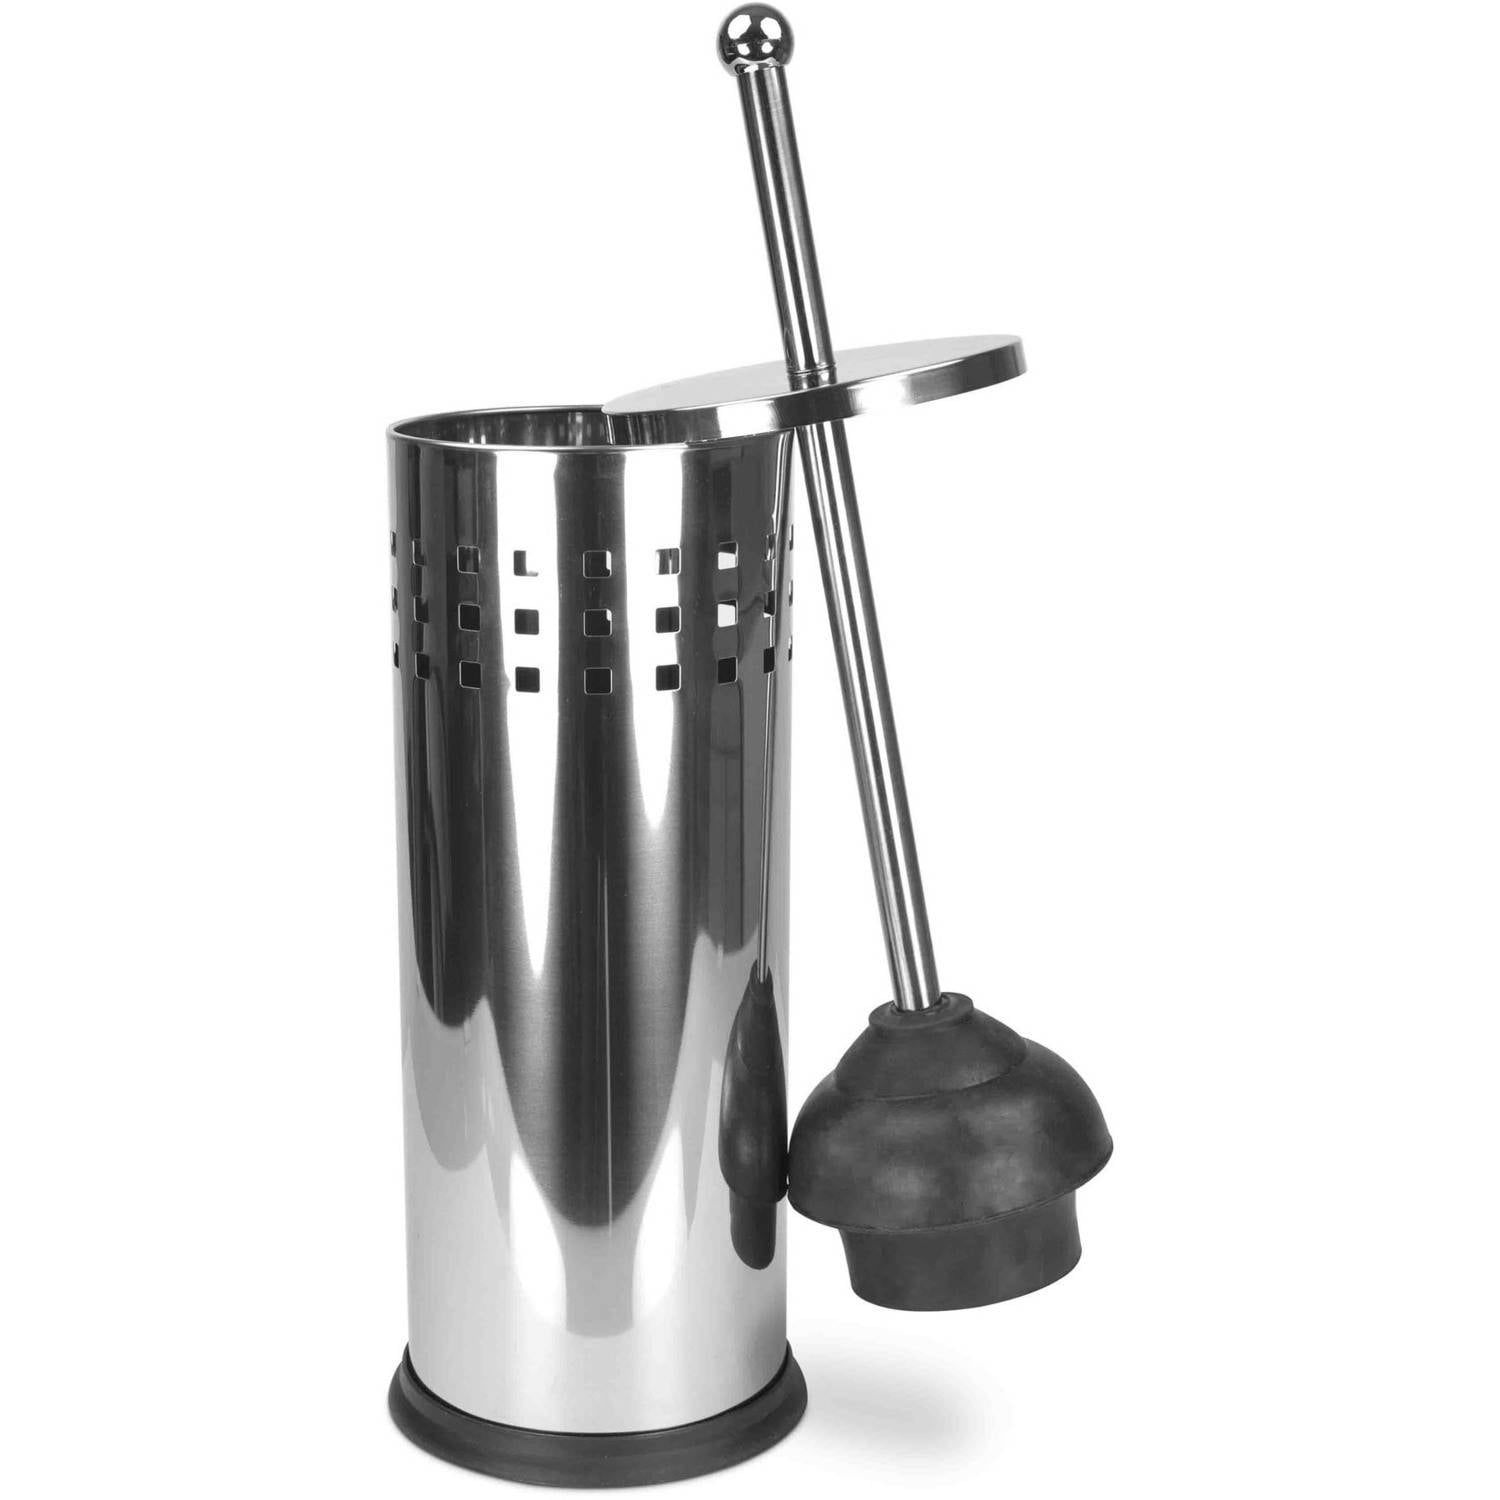 Toilet Plunger Set with Canister for Bathroom quick Dry Holder in Chrome 